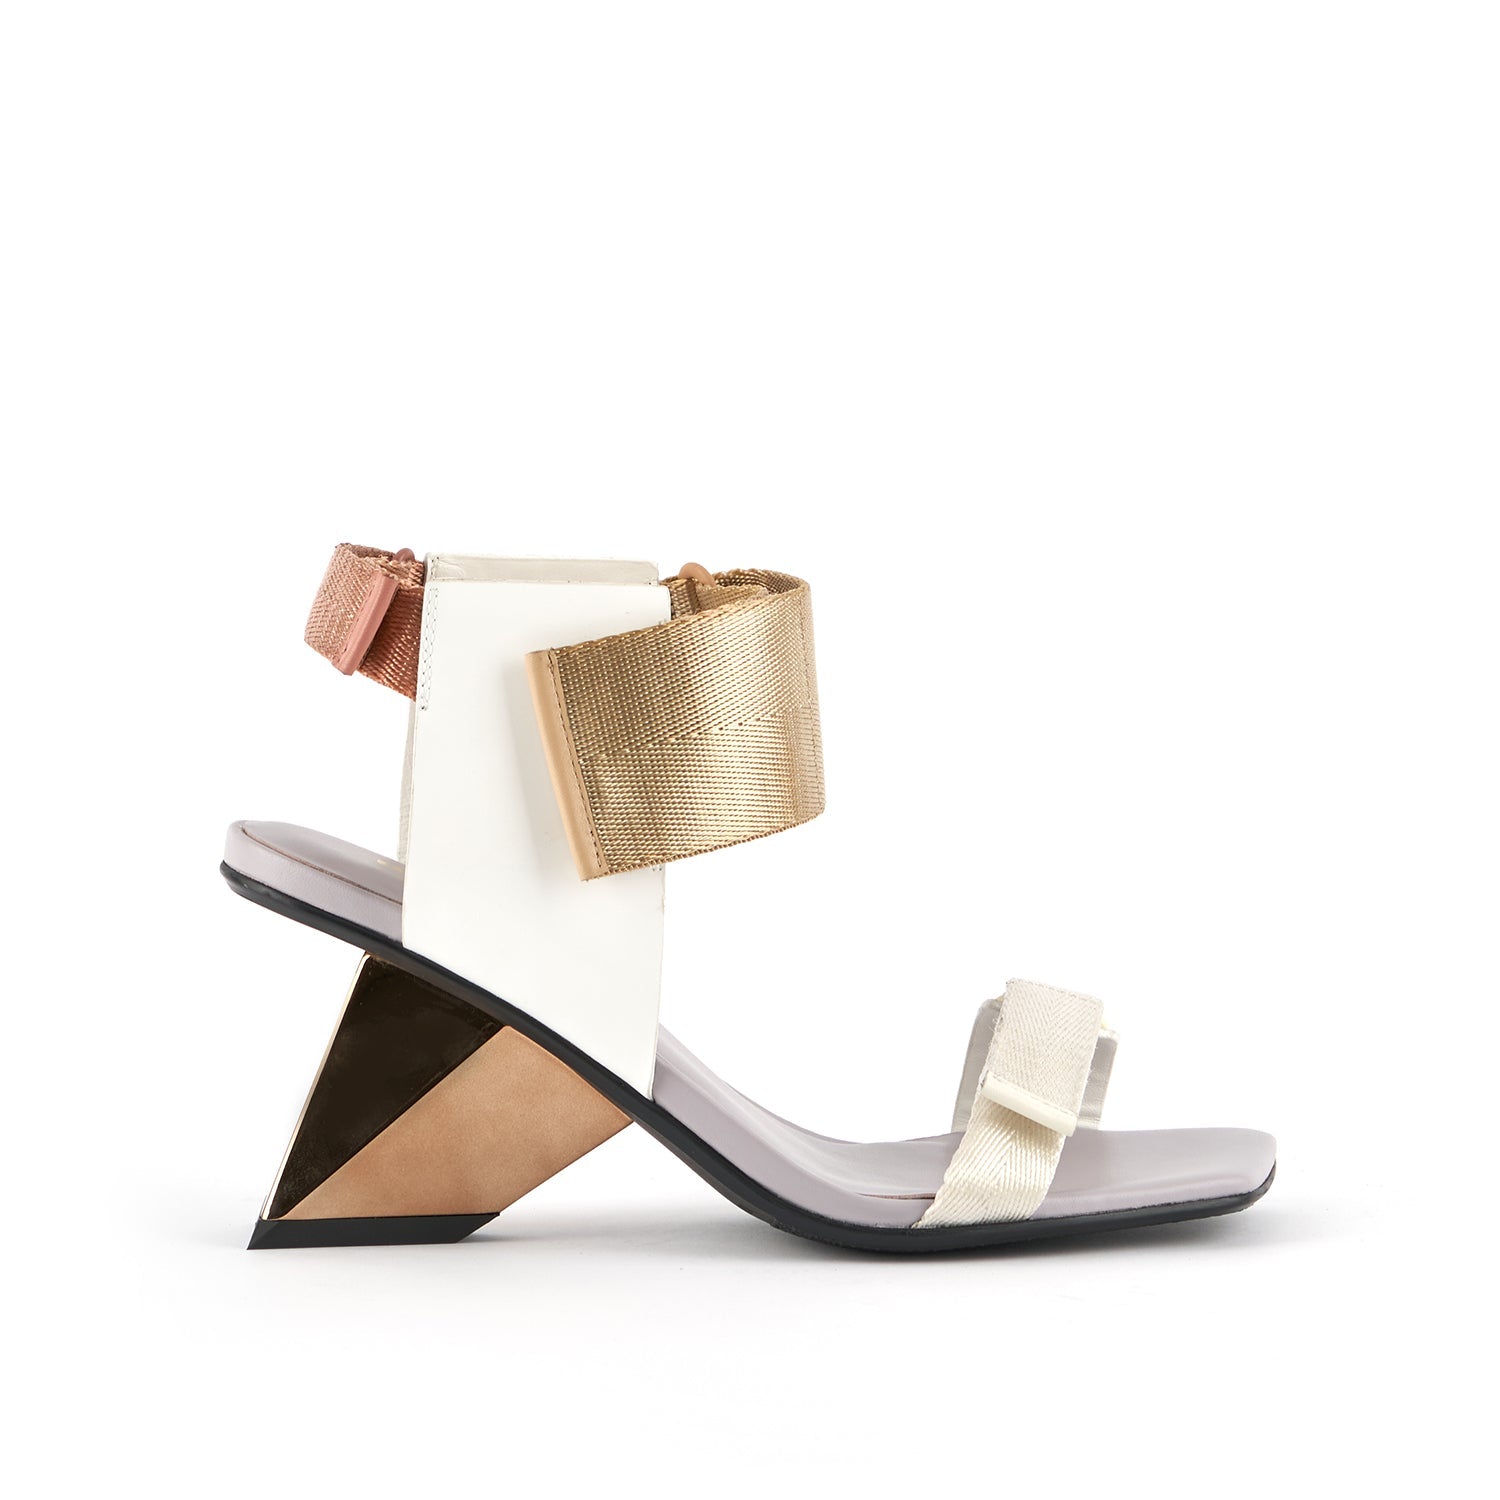 outer side view of the united nude rockit run high heel sandal in the color bohemian.